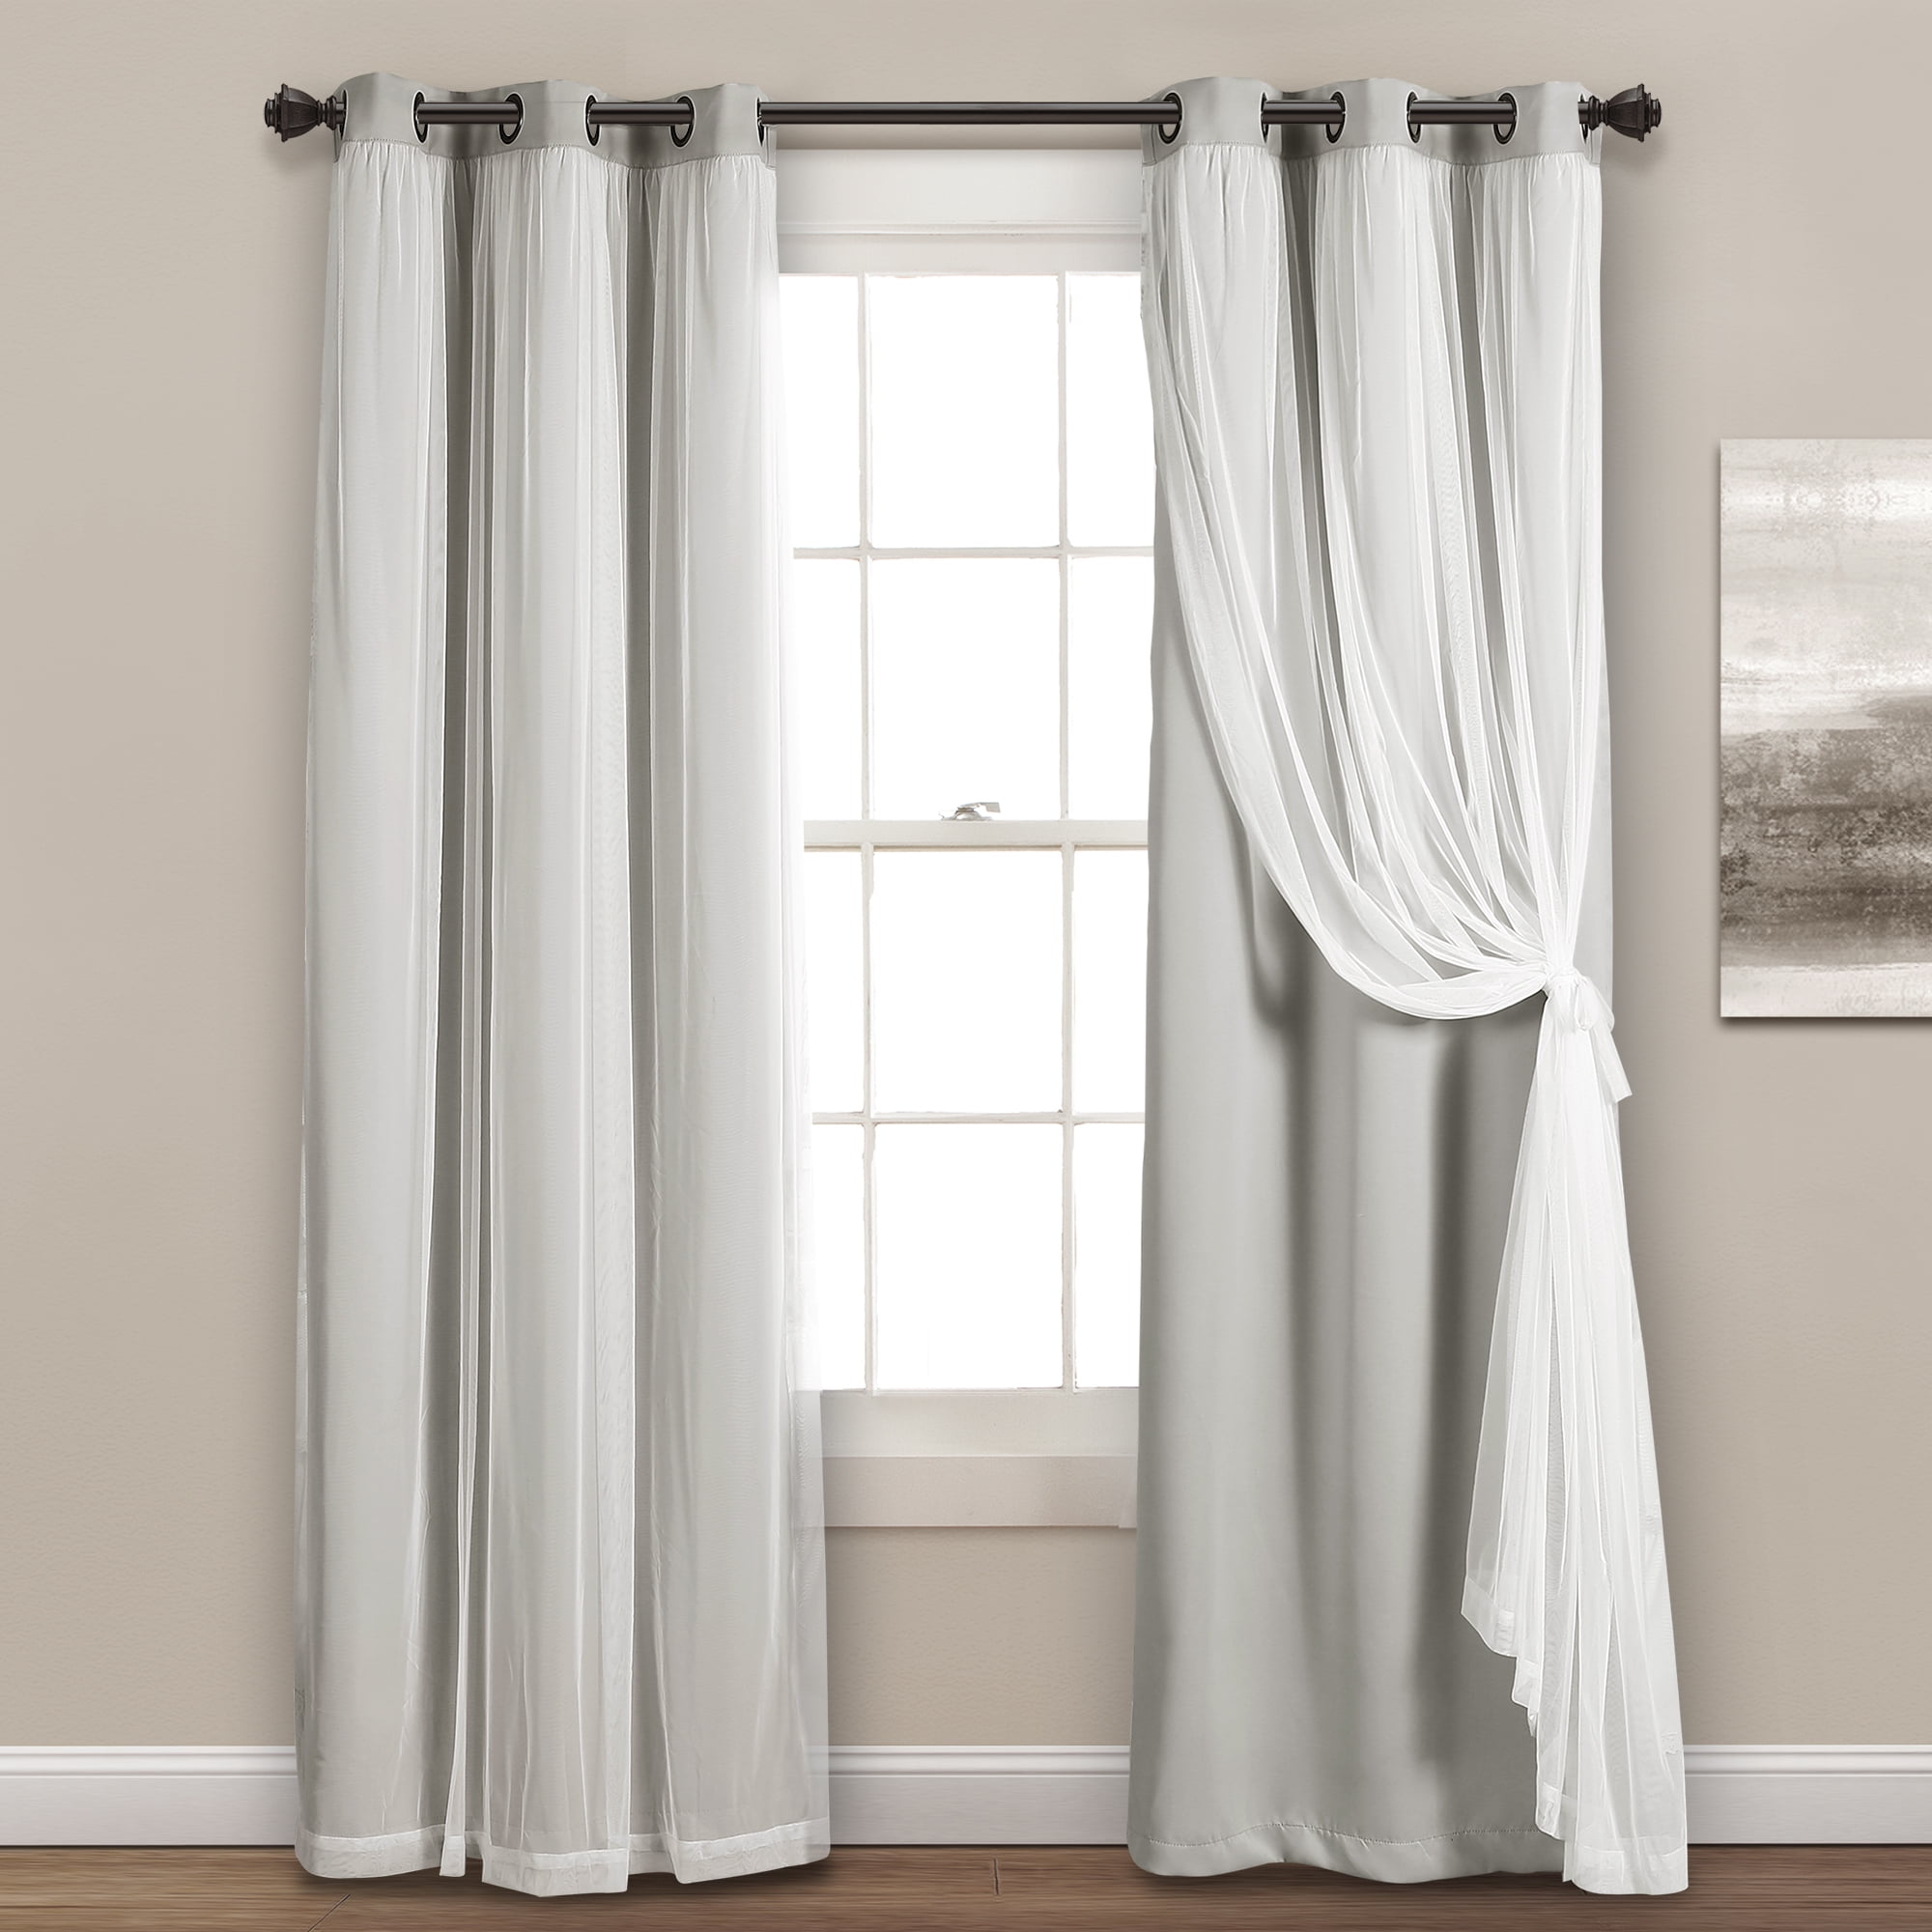 White Floral Transitional Semi-Sheer Light Filtering Window Curtain with Overlay 